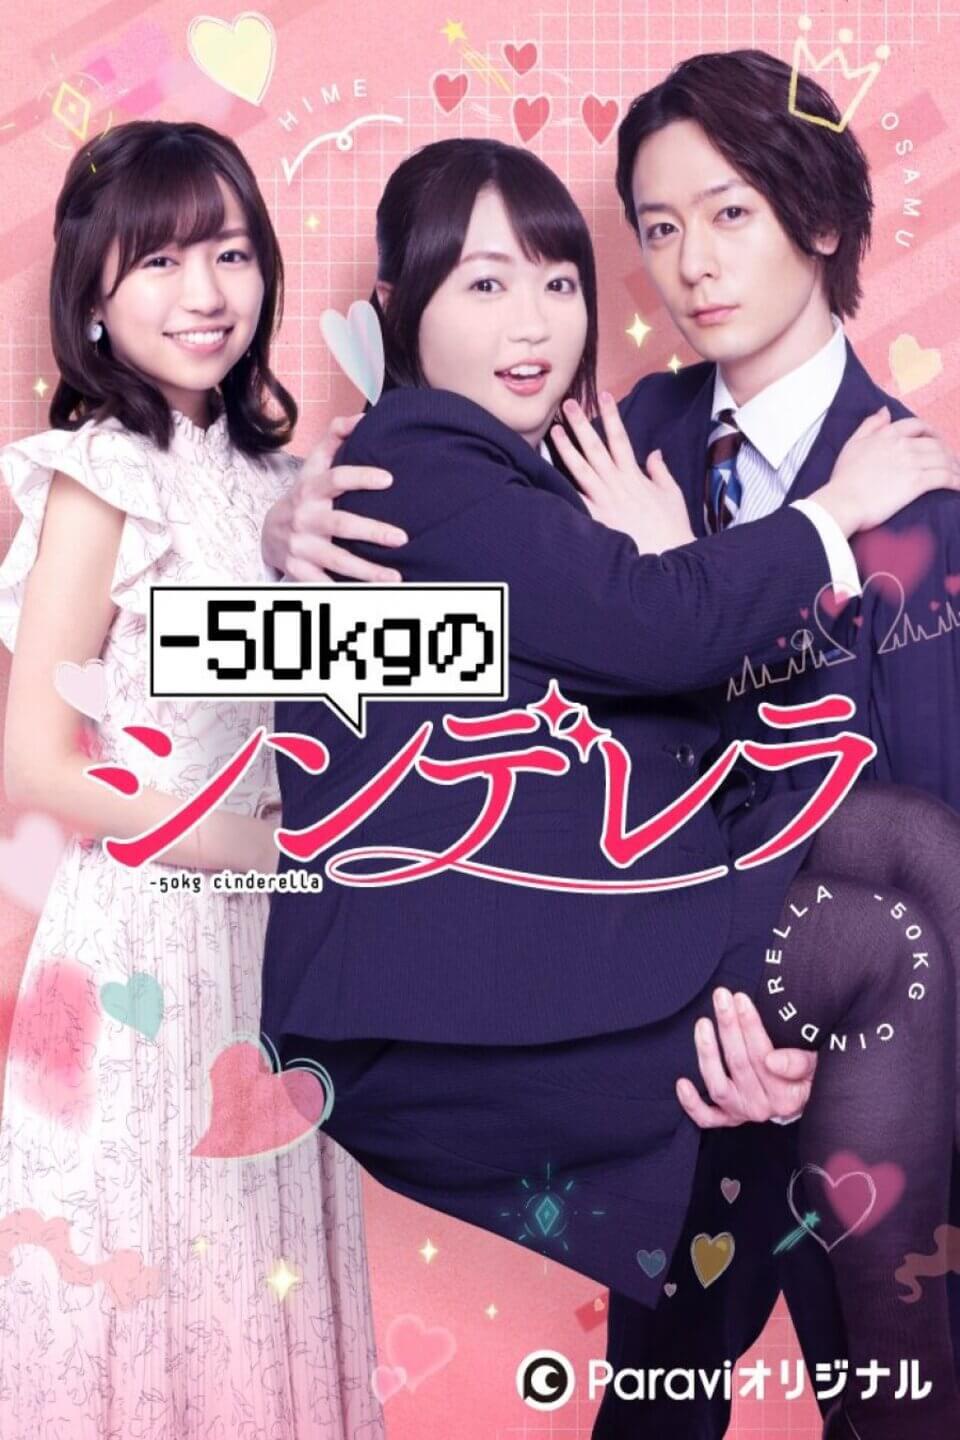 TV ratings for -50kg No Cinderella (－50kgのシンデレラ) in Malaysia. Paravi TV series